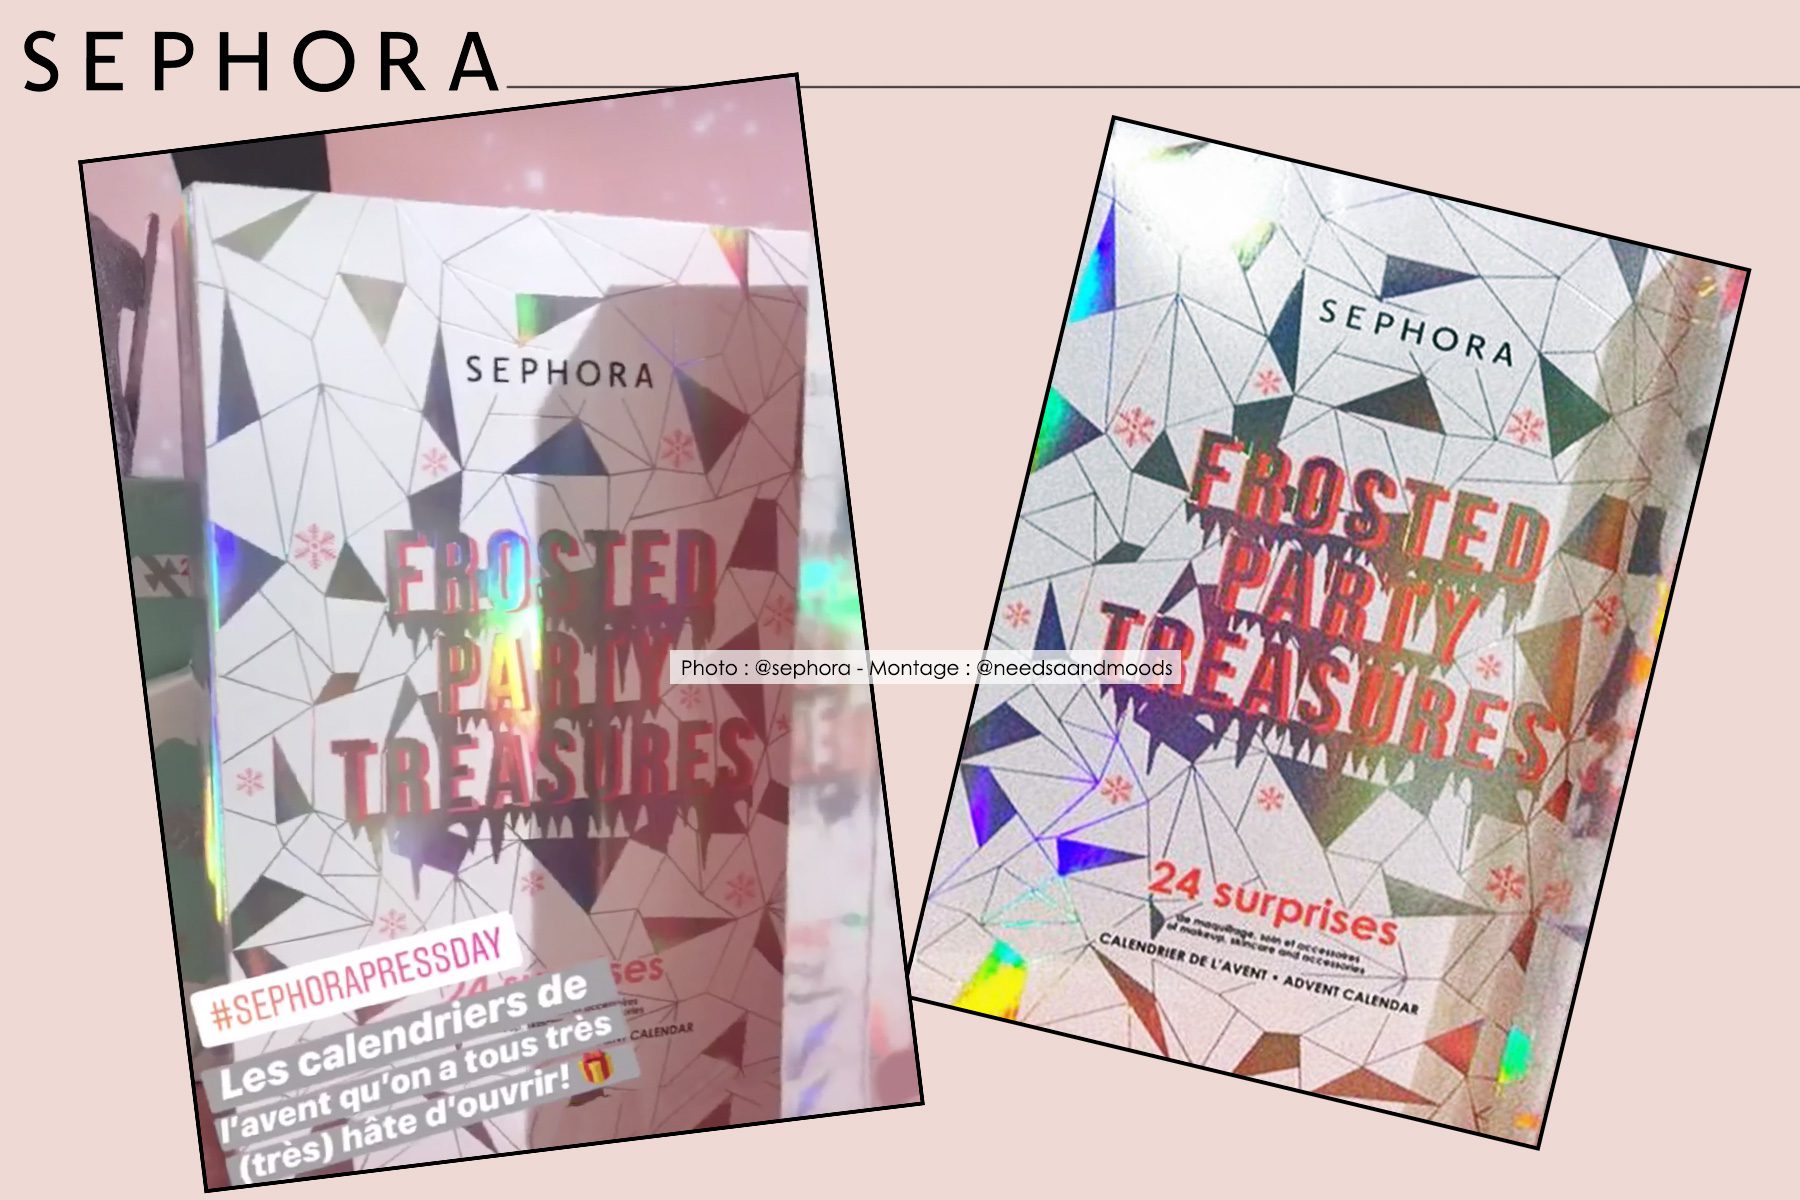 sephora-calendrier-de-l-avent-2019-frosted-party-treasures